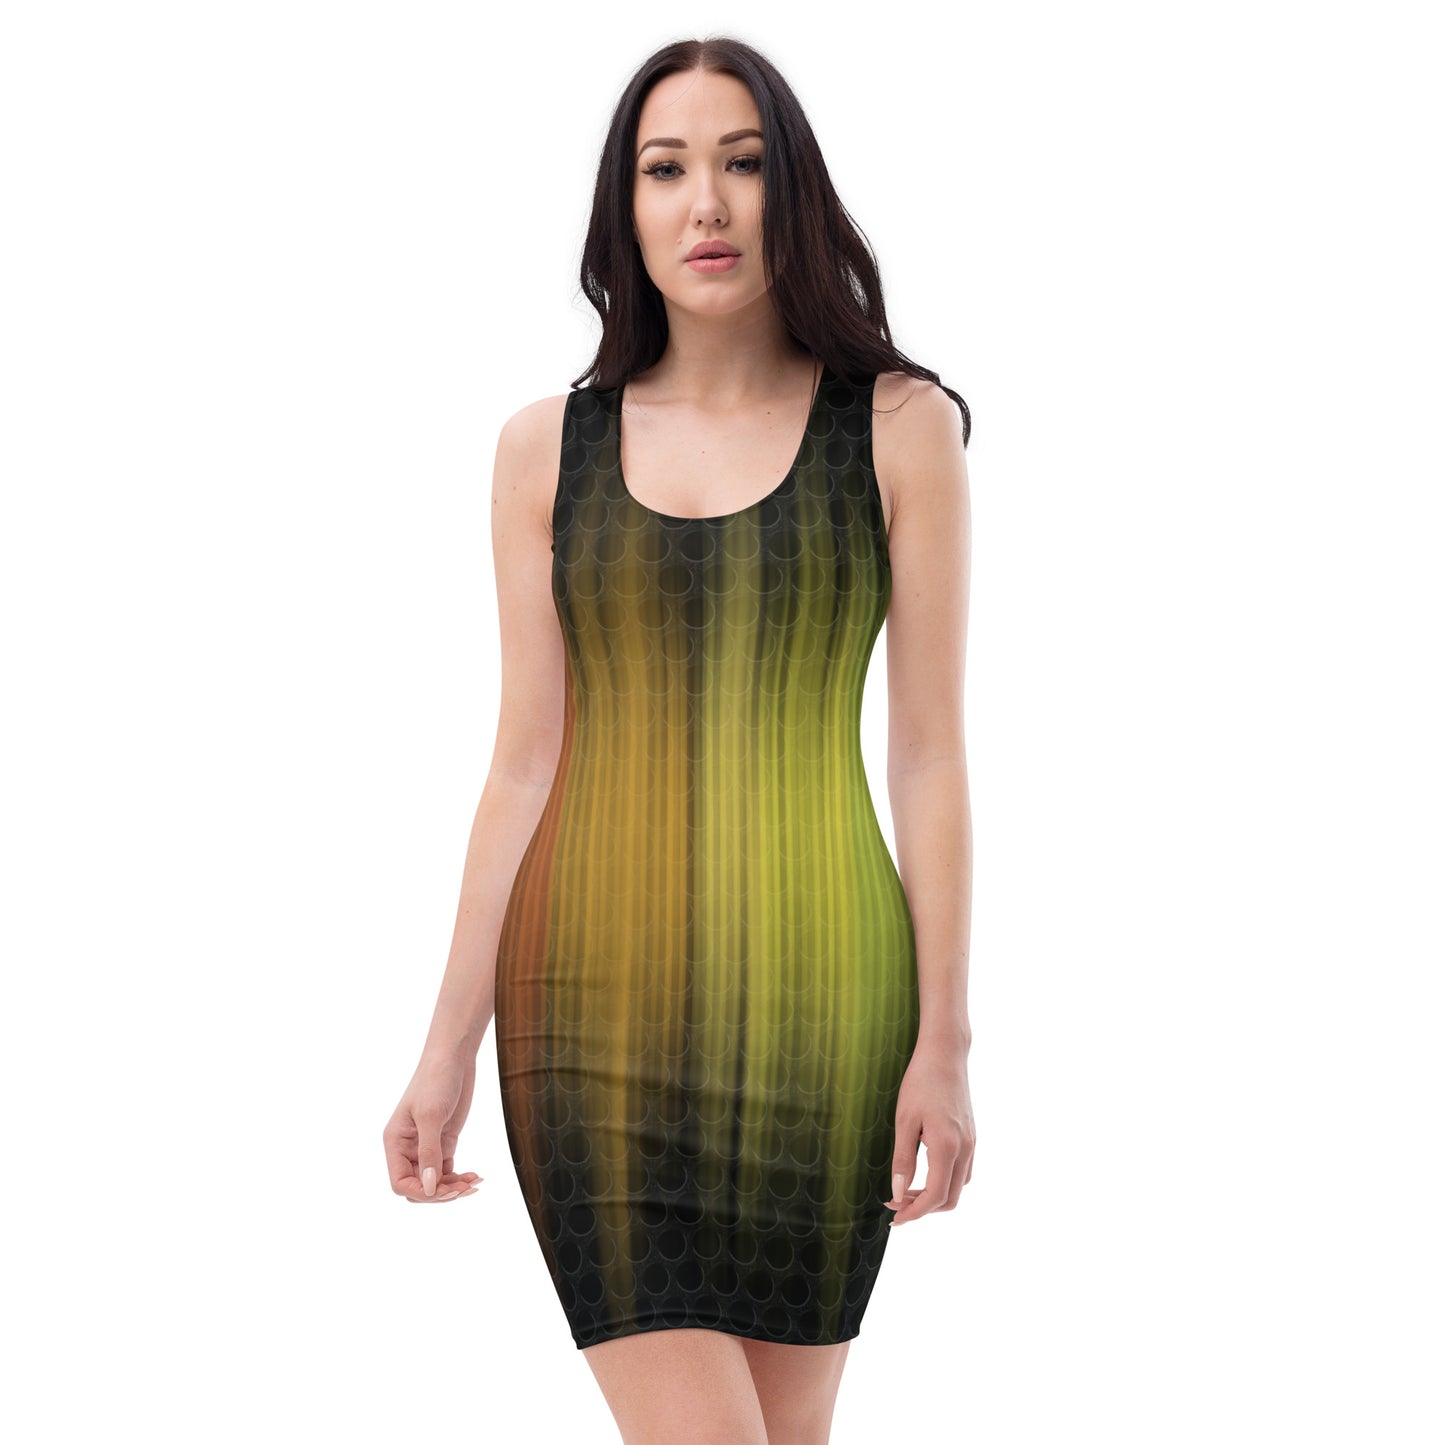 "Colors of the spectrum" patterned dress